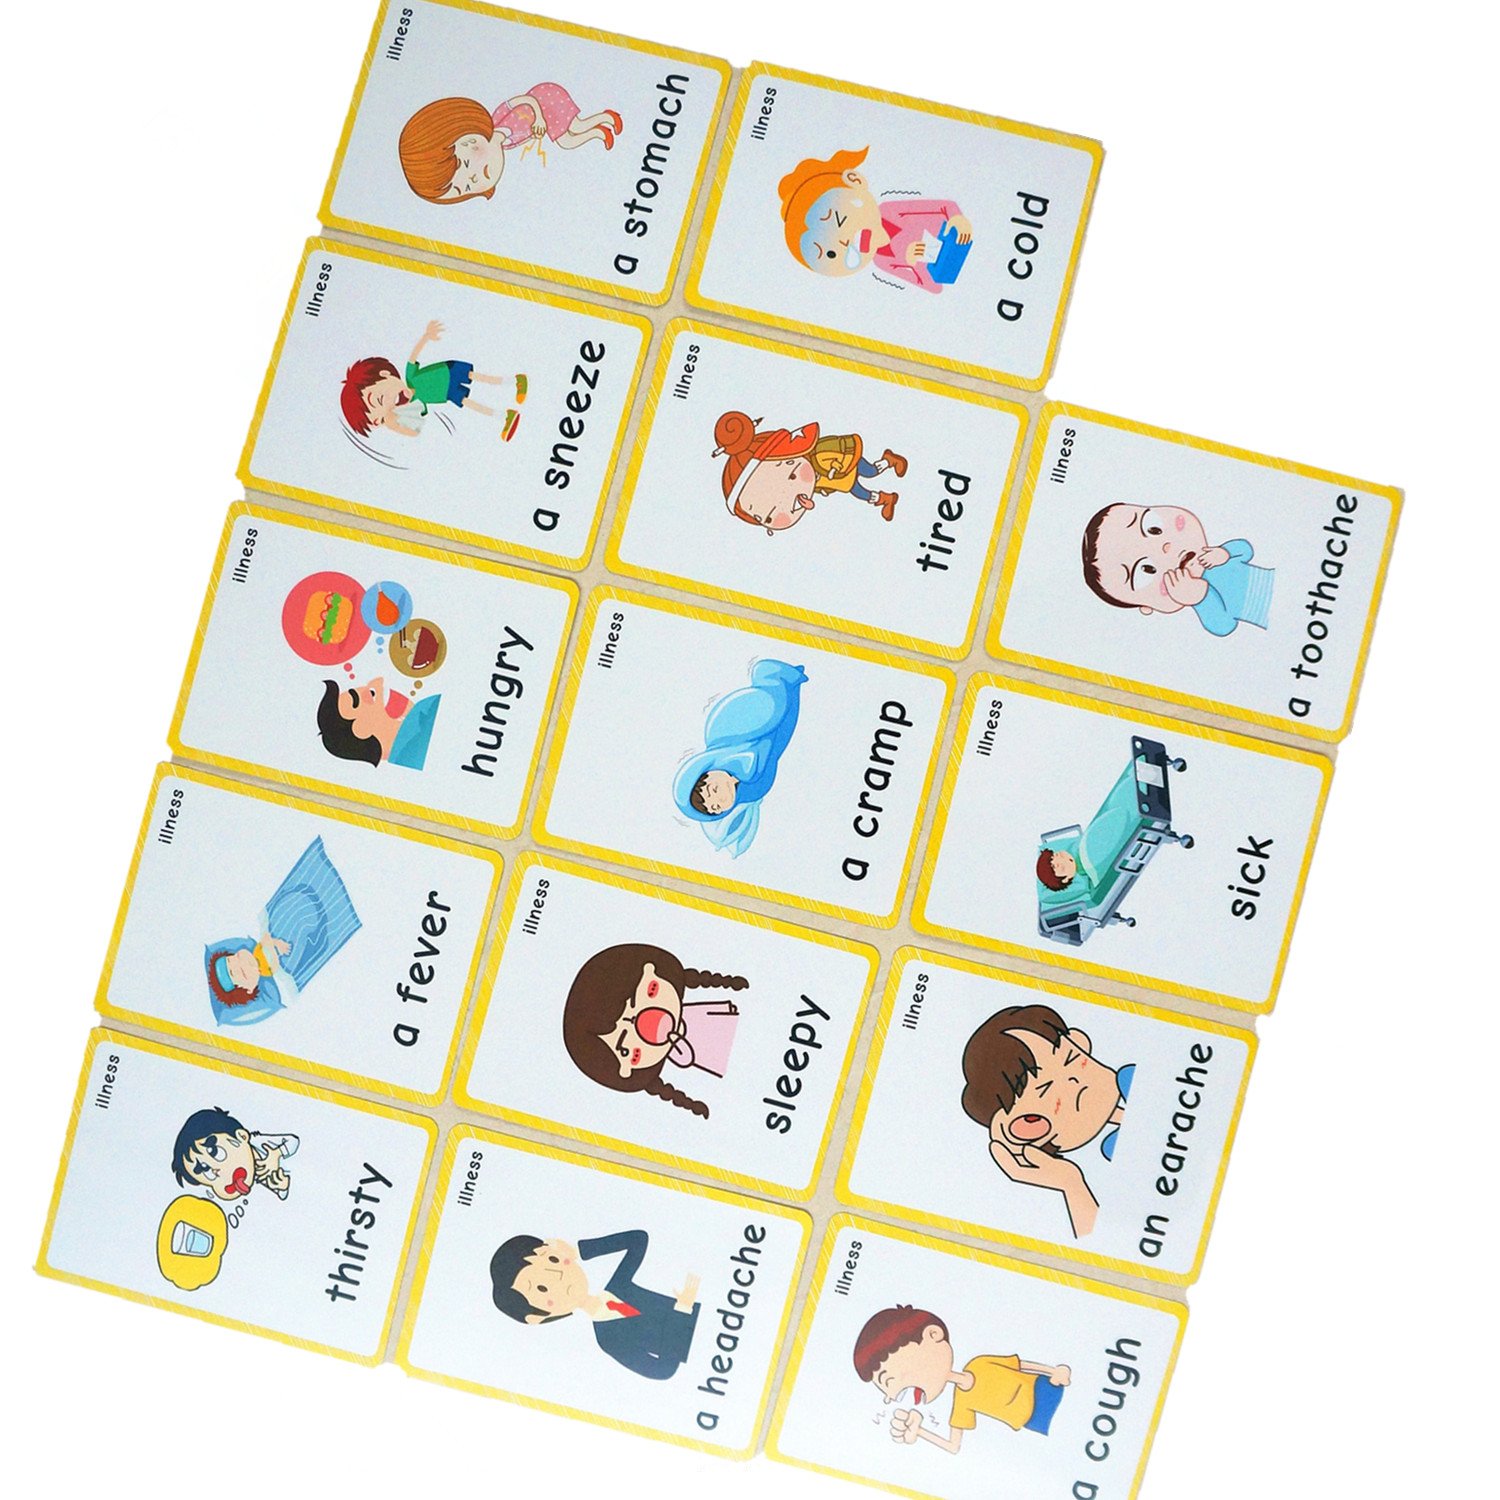 36 Pieces Kids Toddlers Playing Flashcards Activity Educational Pocket Cards 